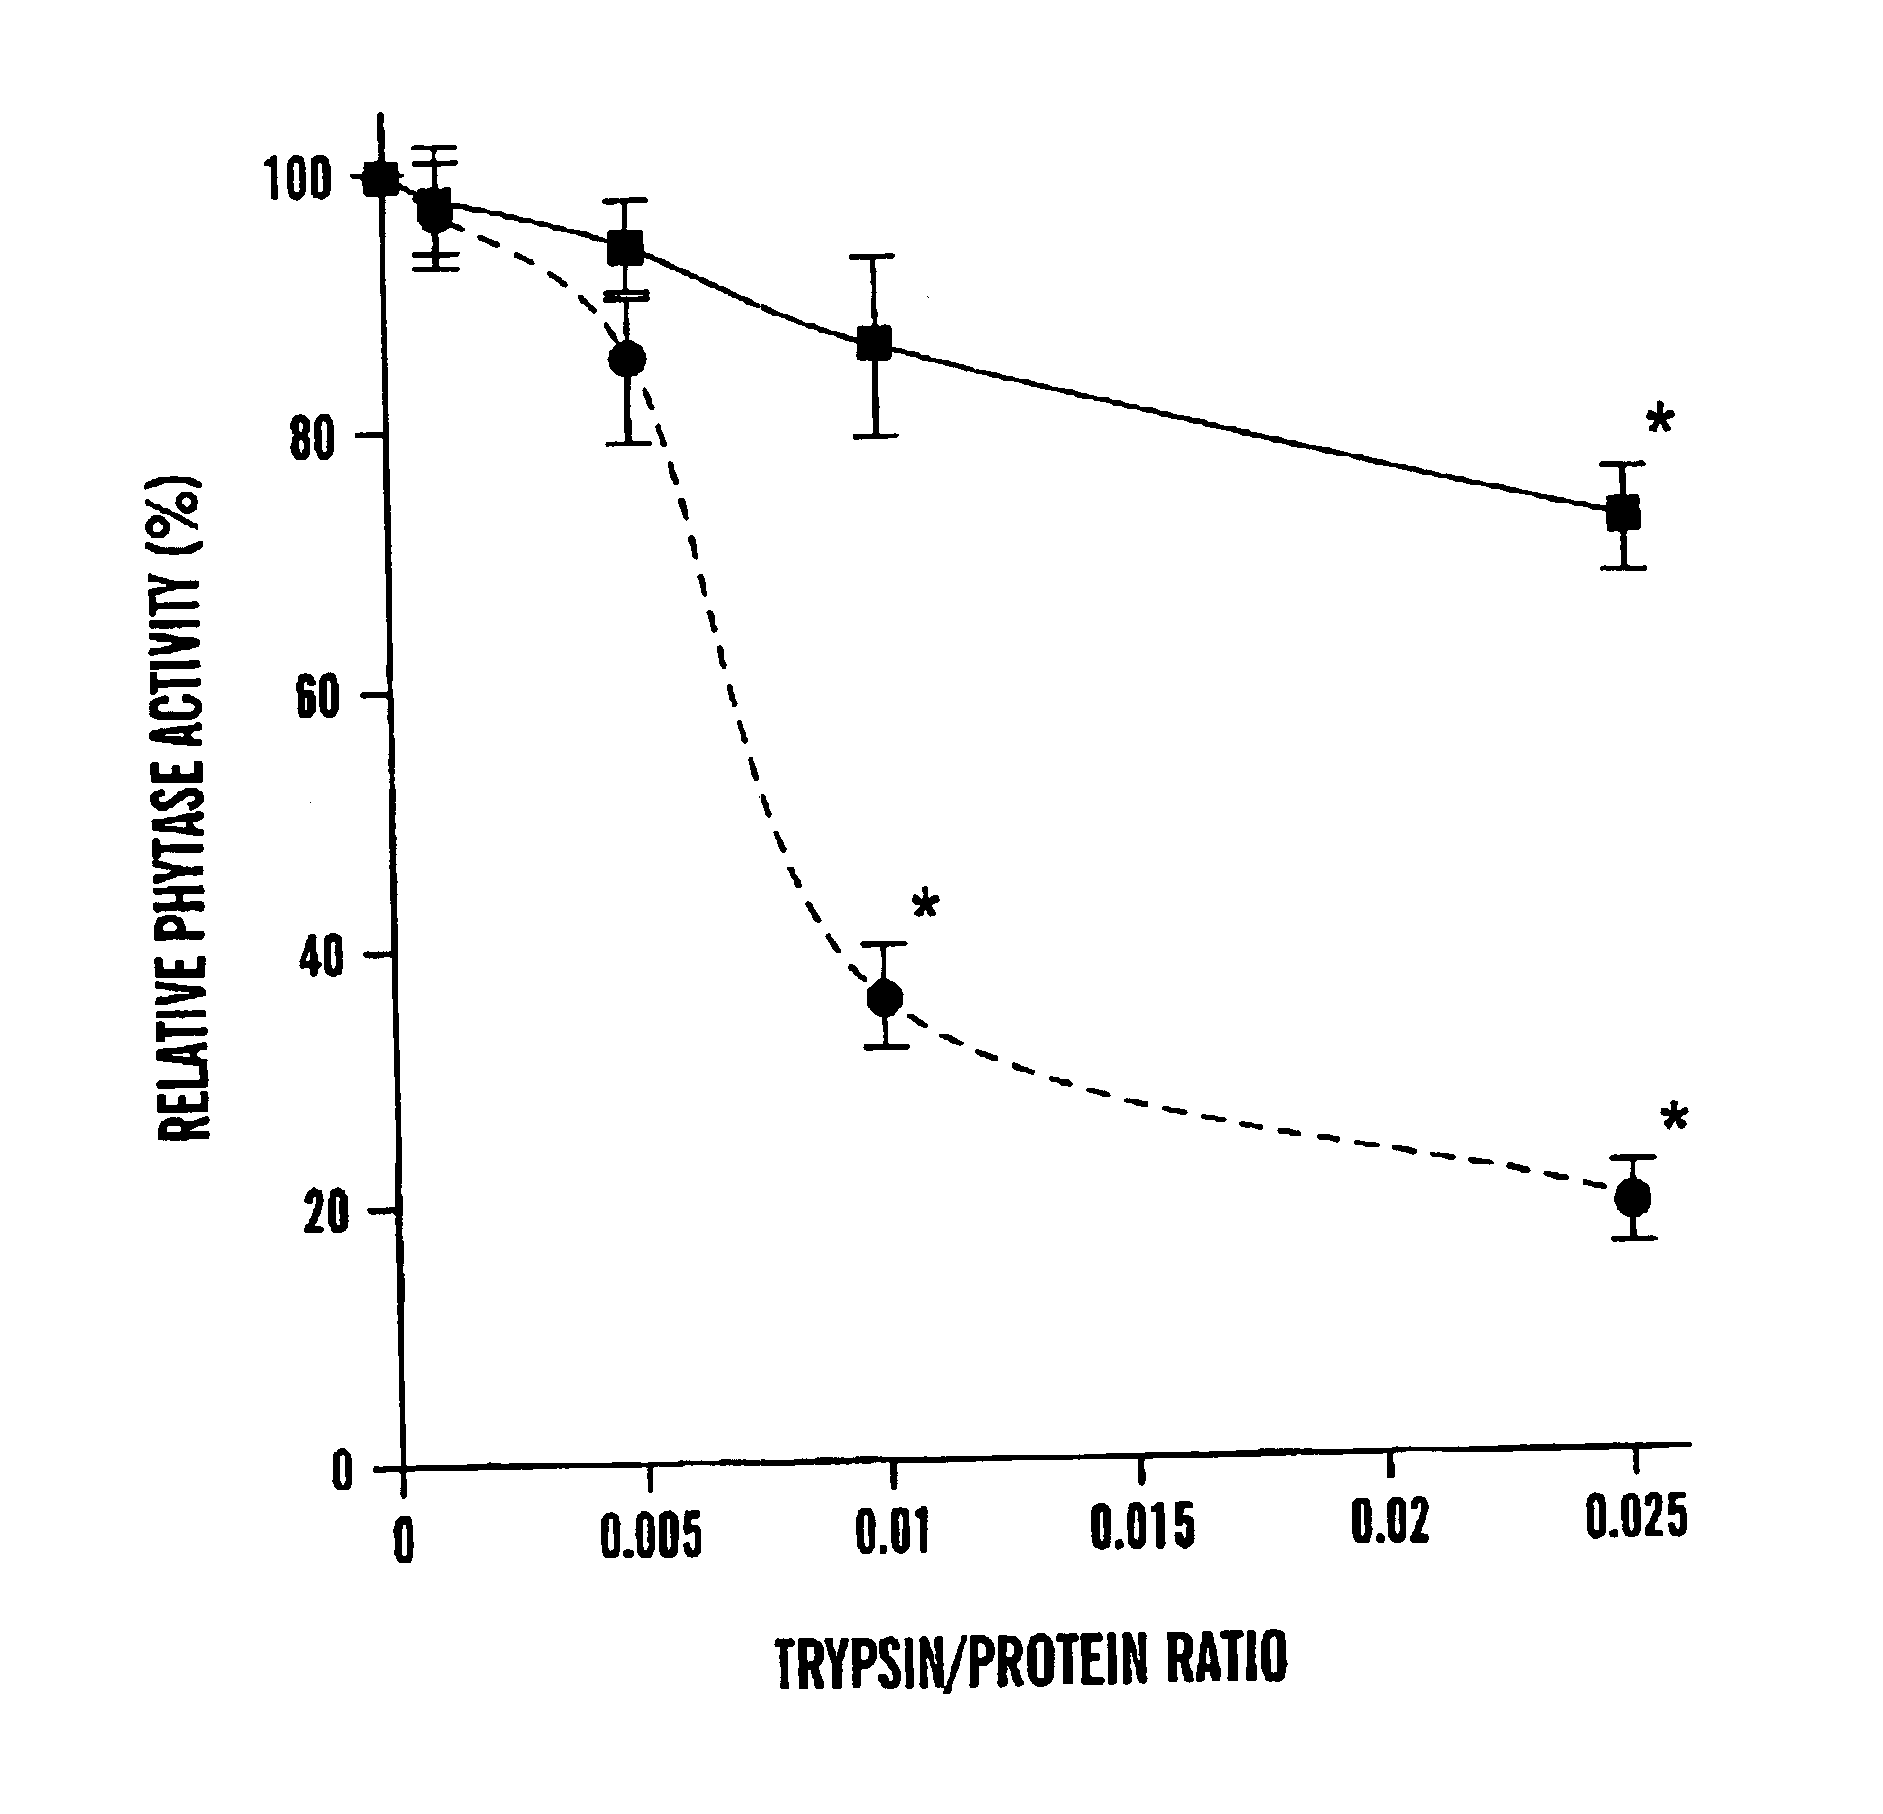 Phosphatases with improved phytase activity